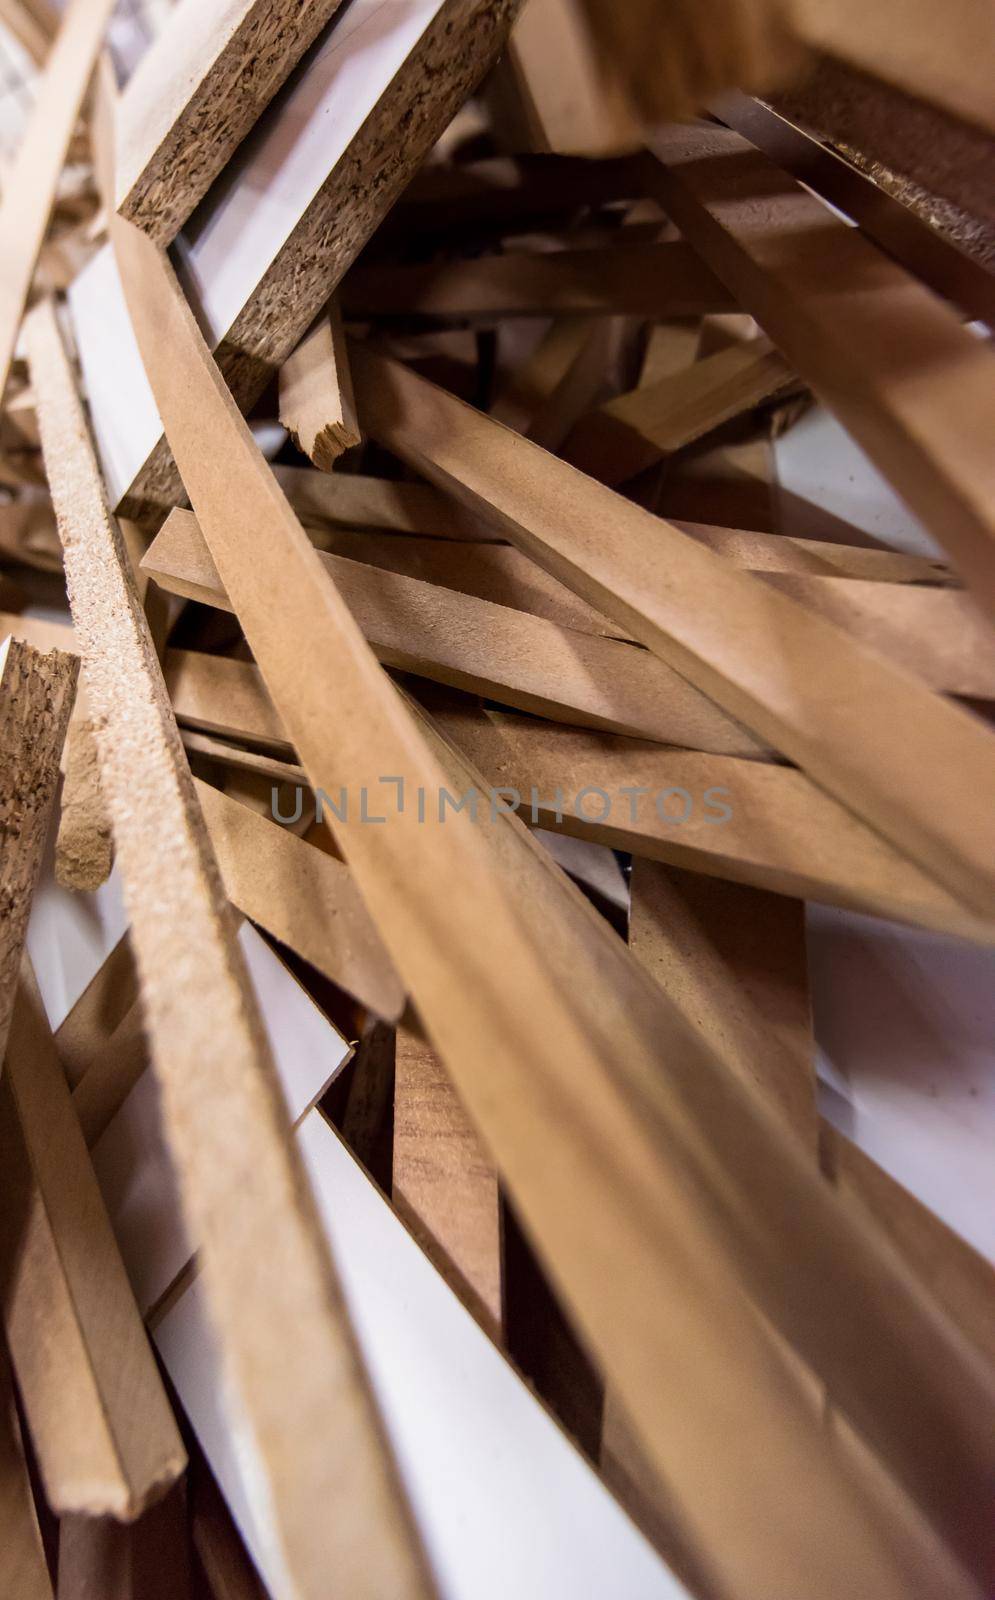 Cut wood pieces remaining from carpenter handcraft at manufacturing company, ready to recycle and reuse process